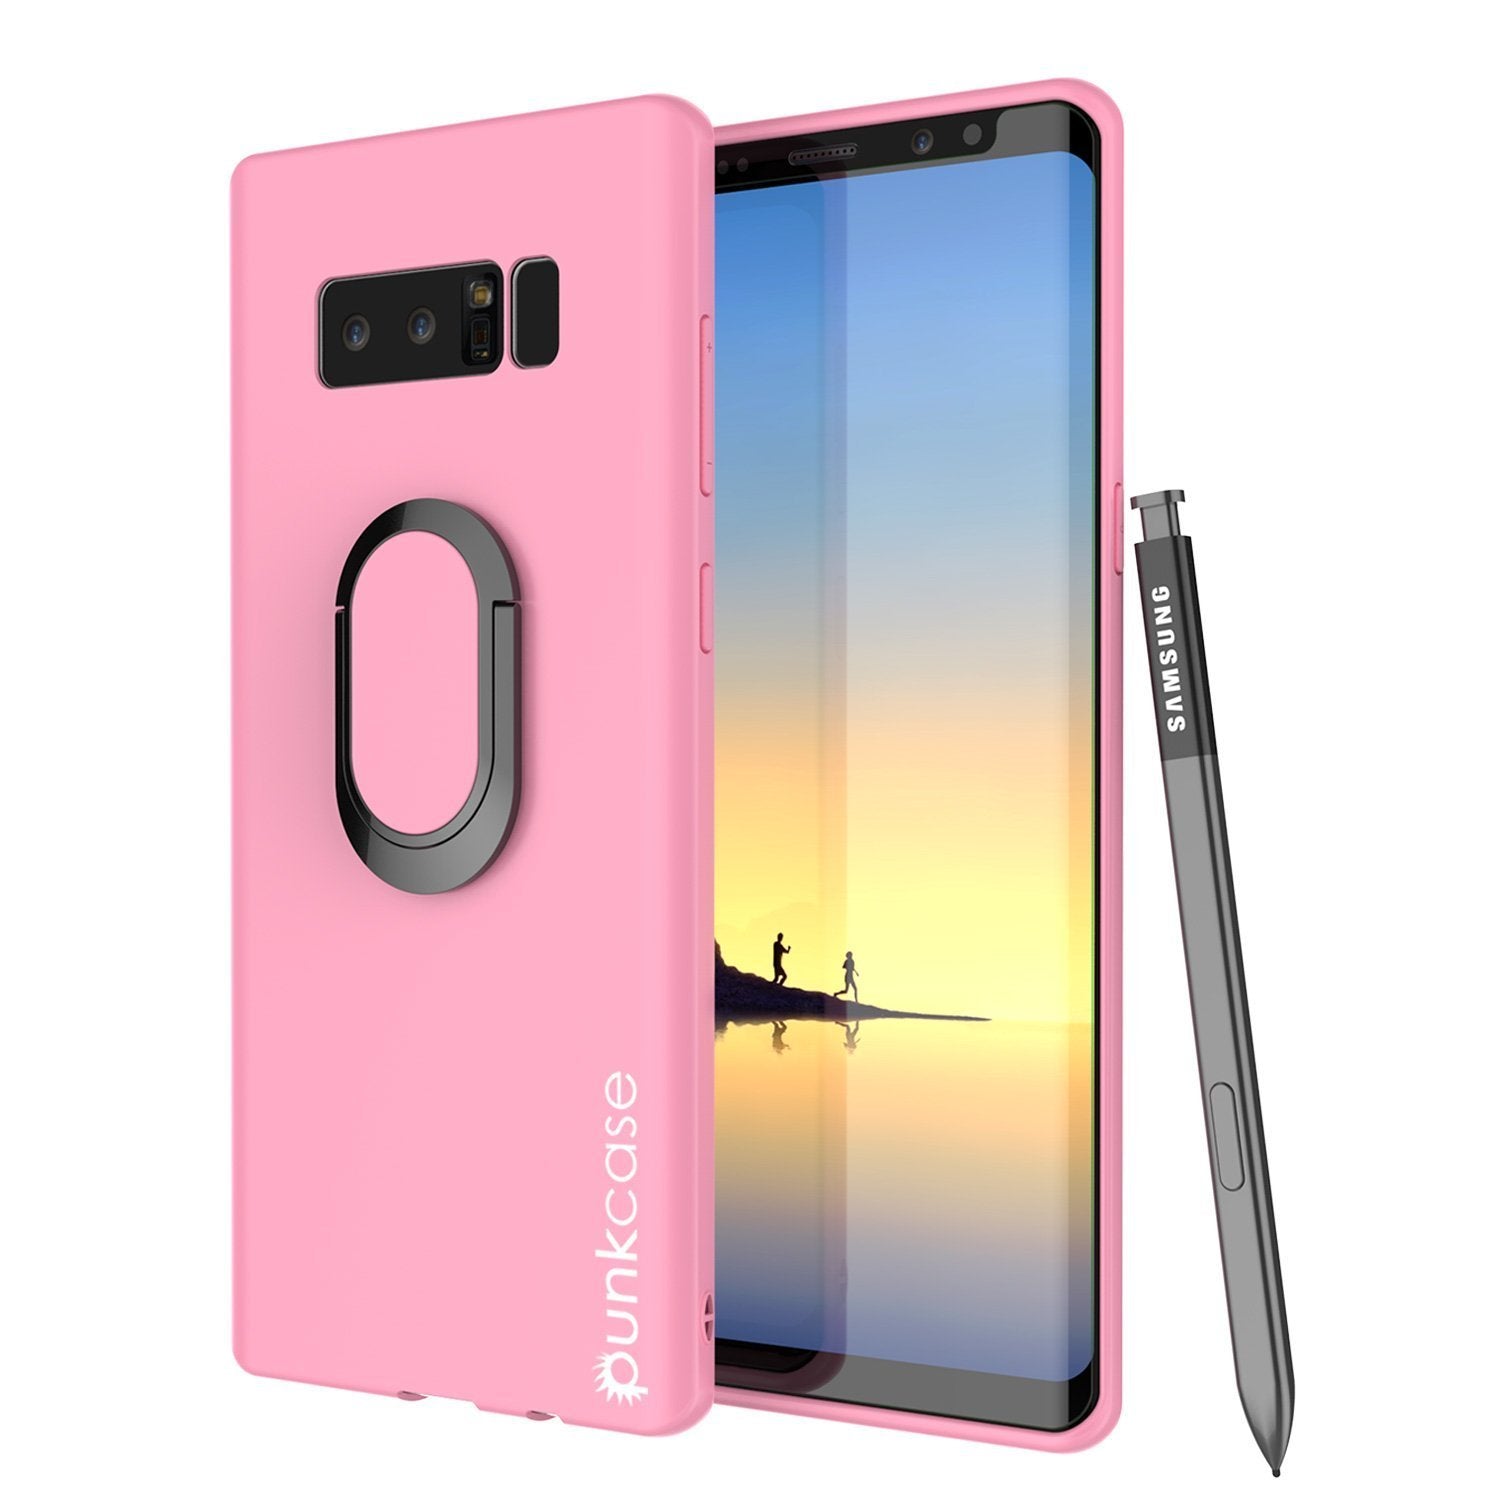 Galaxy Note 8 Case, Punkcase Magnetix Protective TPU Cover W/ Kickstand, Screen Protector [Pink]